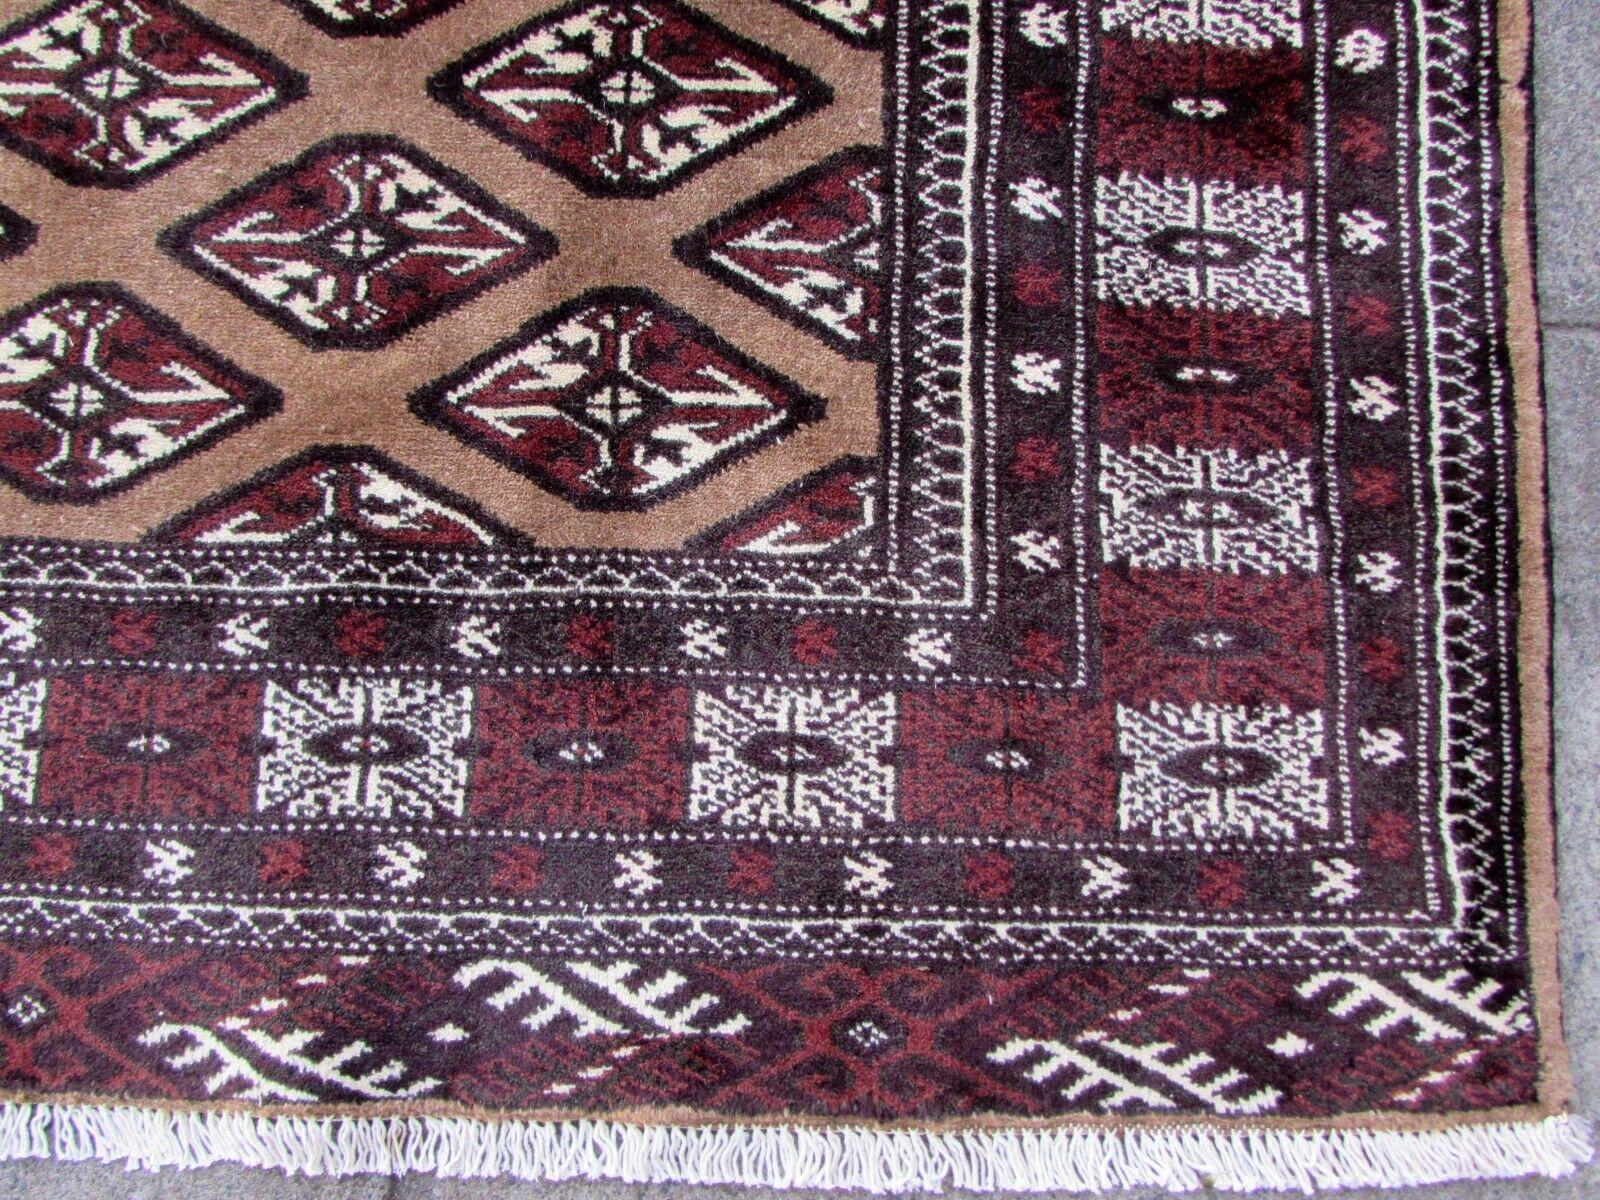 Handmade vintage rug from Afghanistan in geometric pattern. The rug is from the end of 20th century in original good condition

- Condition: Original good,

- circa 1970s,

- Size: 5' x 8.1' (149cm x 243cm),

- Material: Wool,

- Country